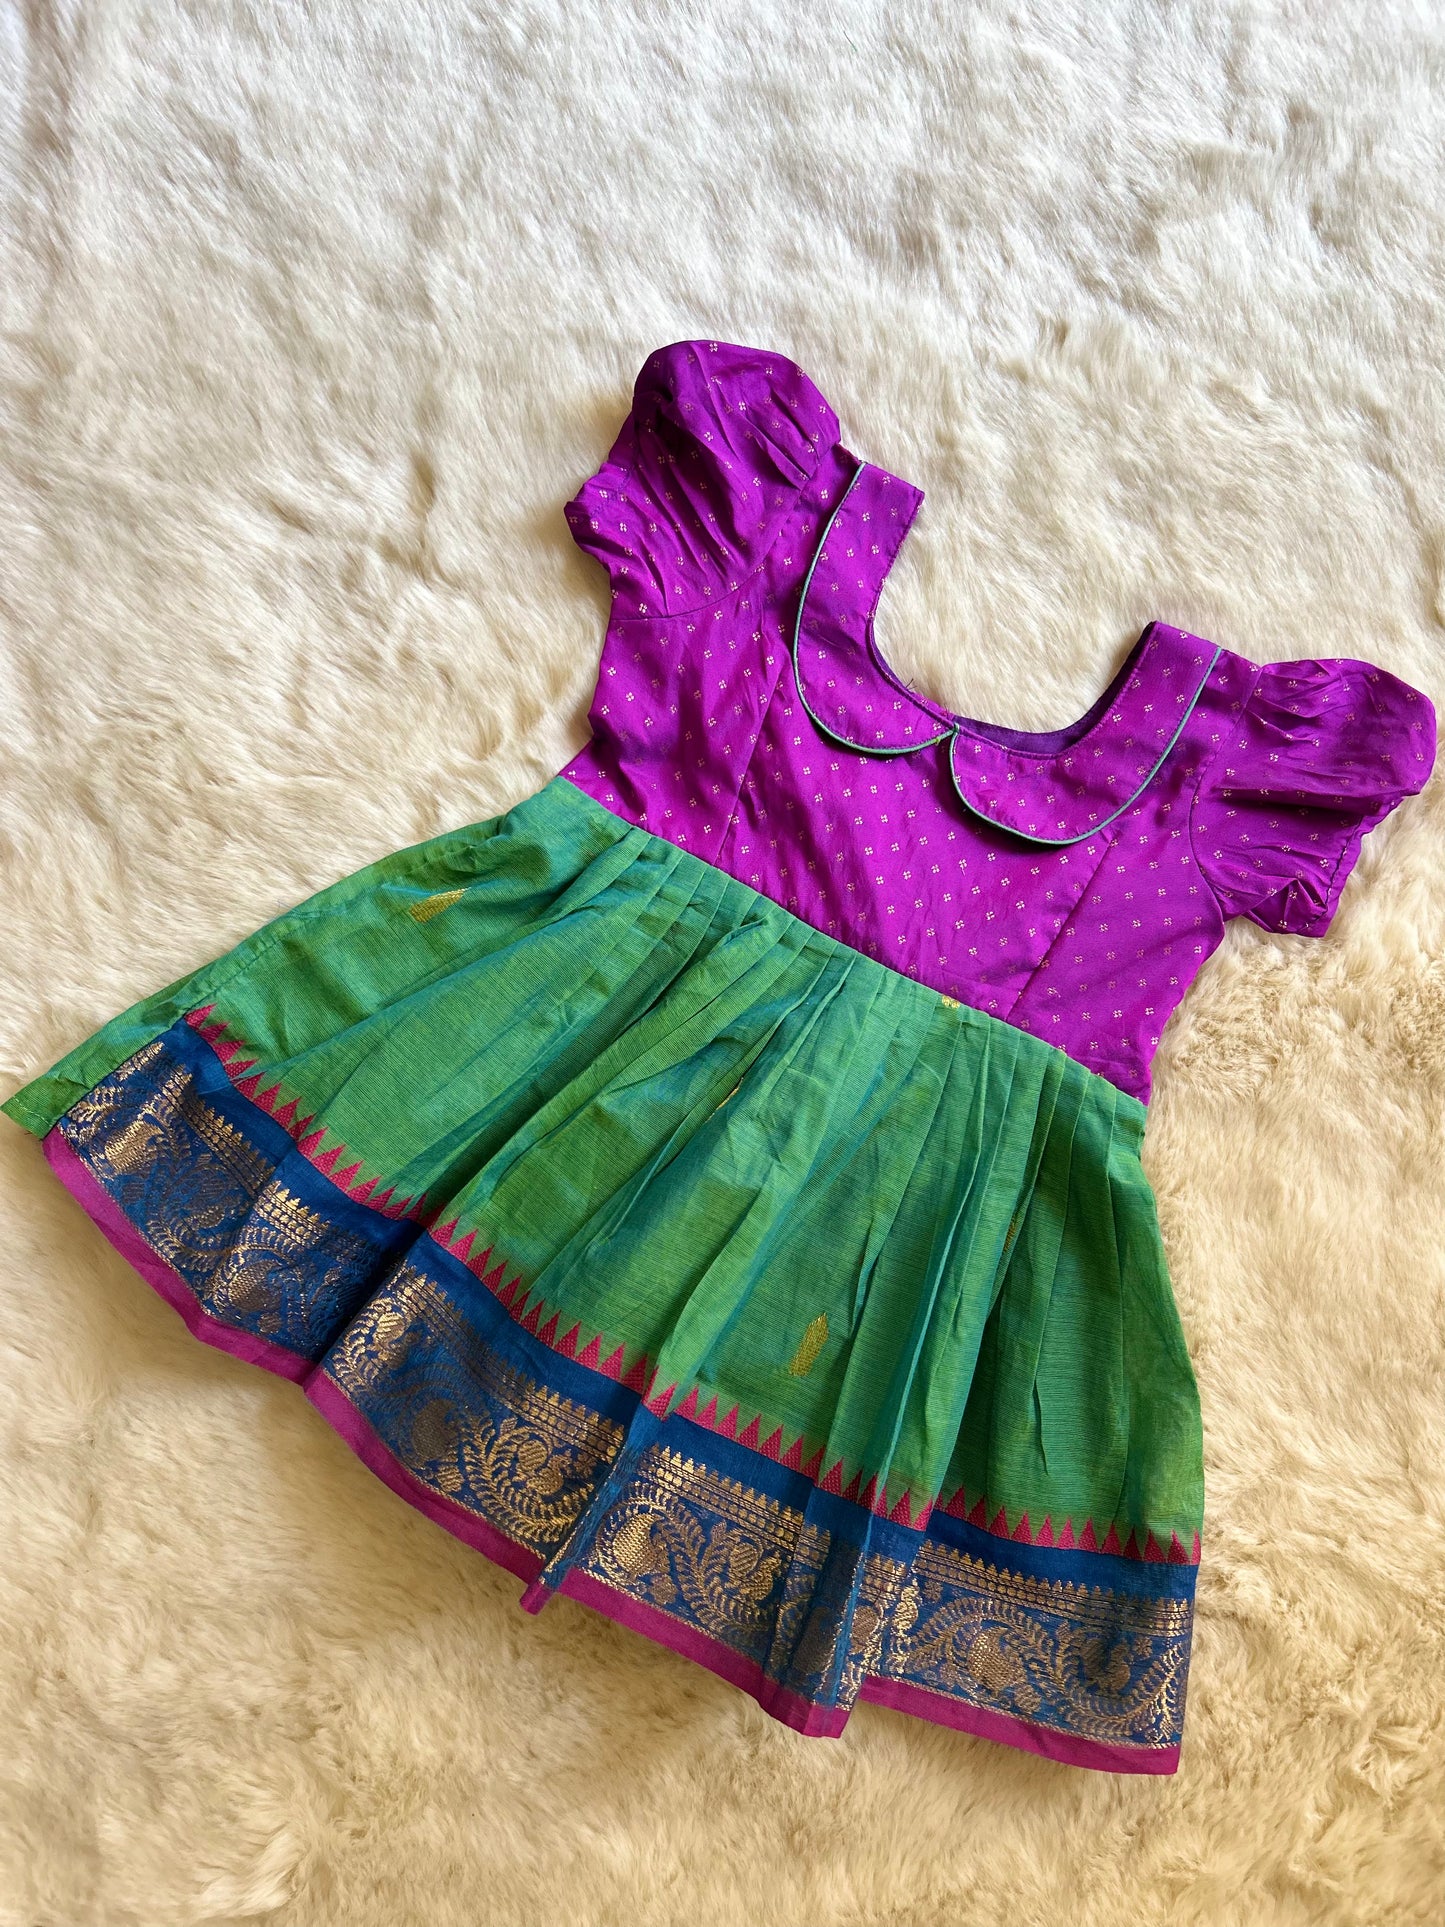 Dual shade pink and pleasant green - Kanchi Cotton South Indian Ethnic Frock for Baby Girl